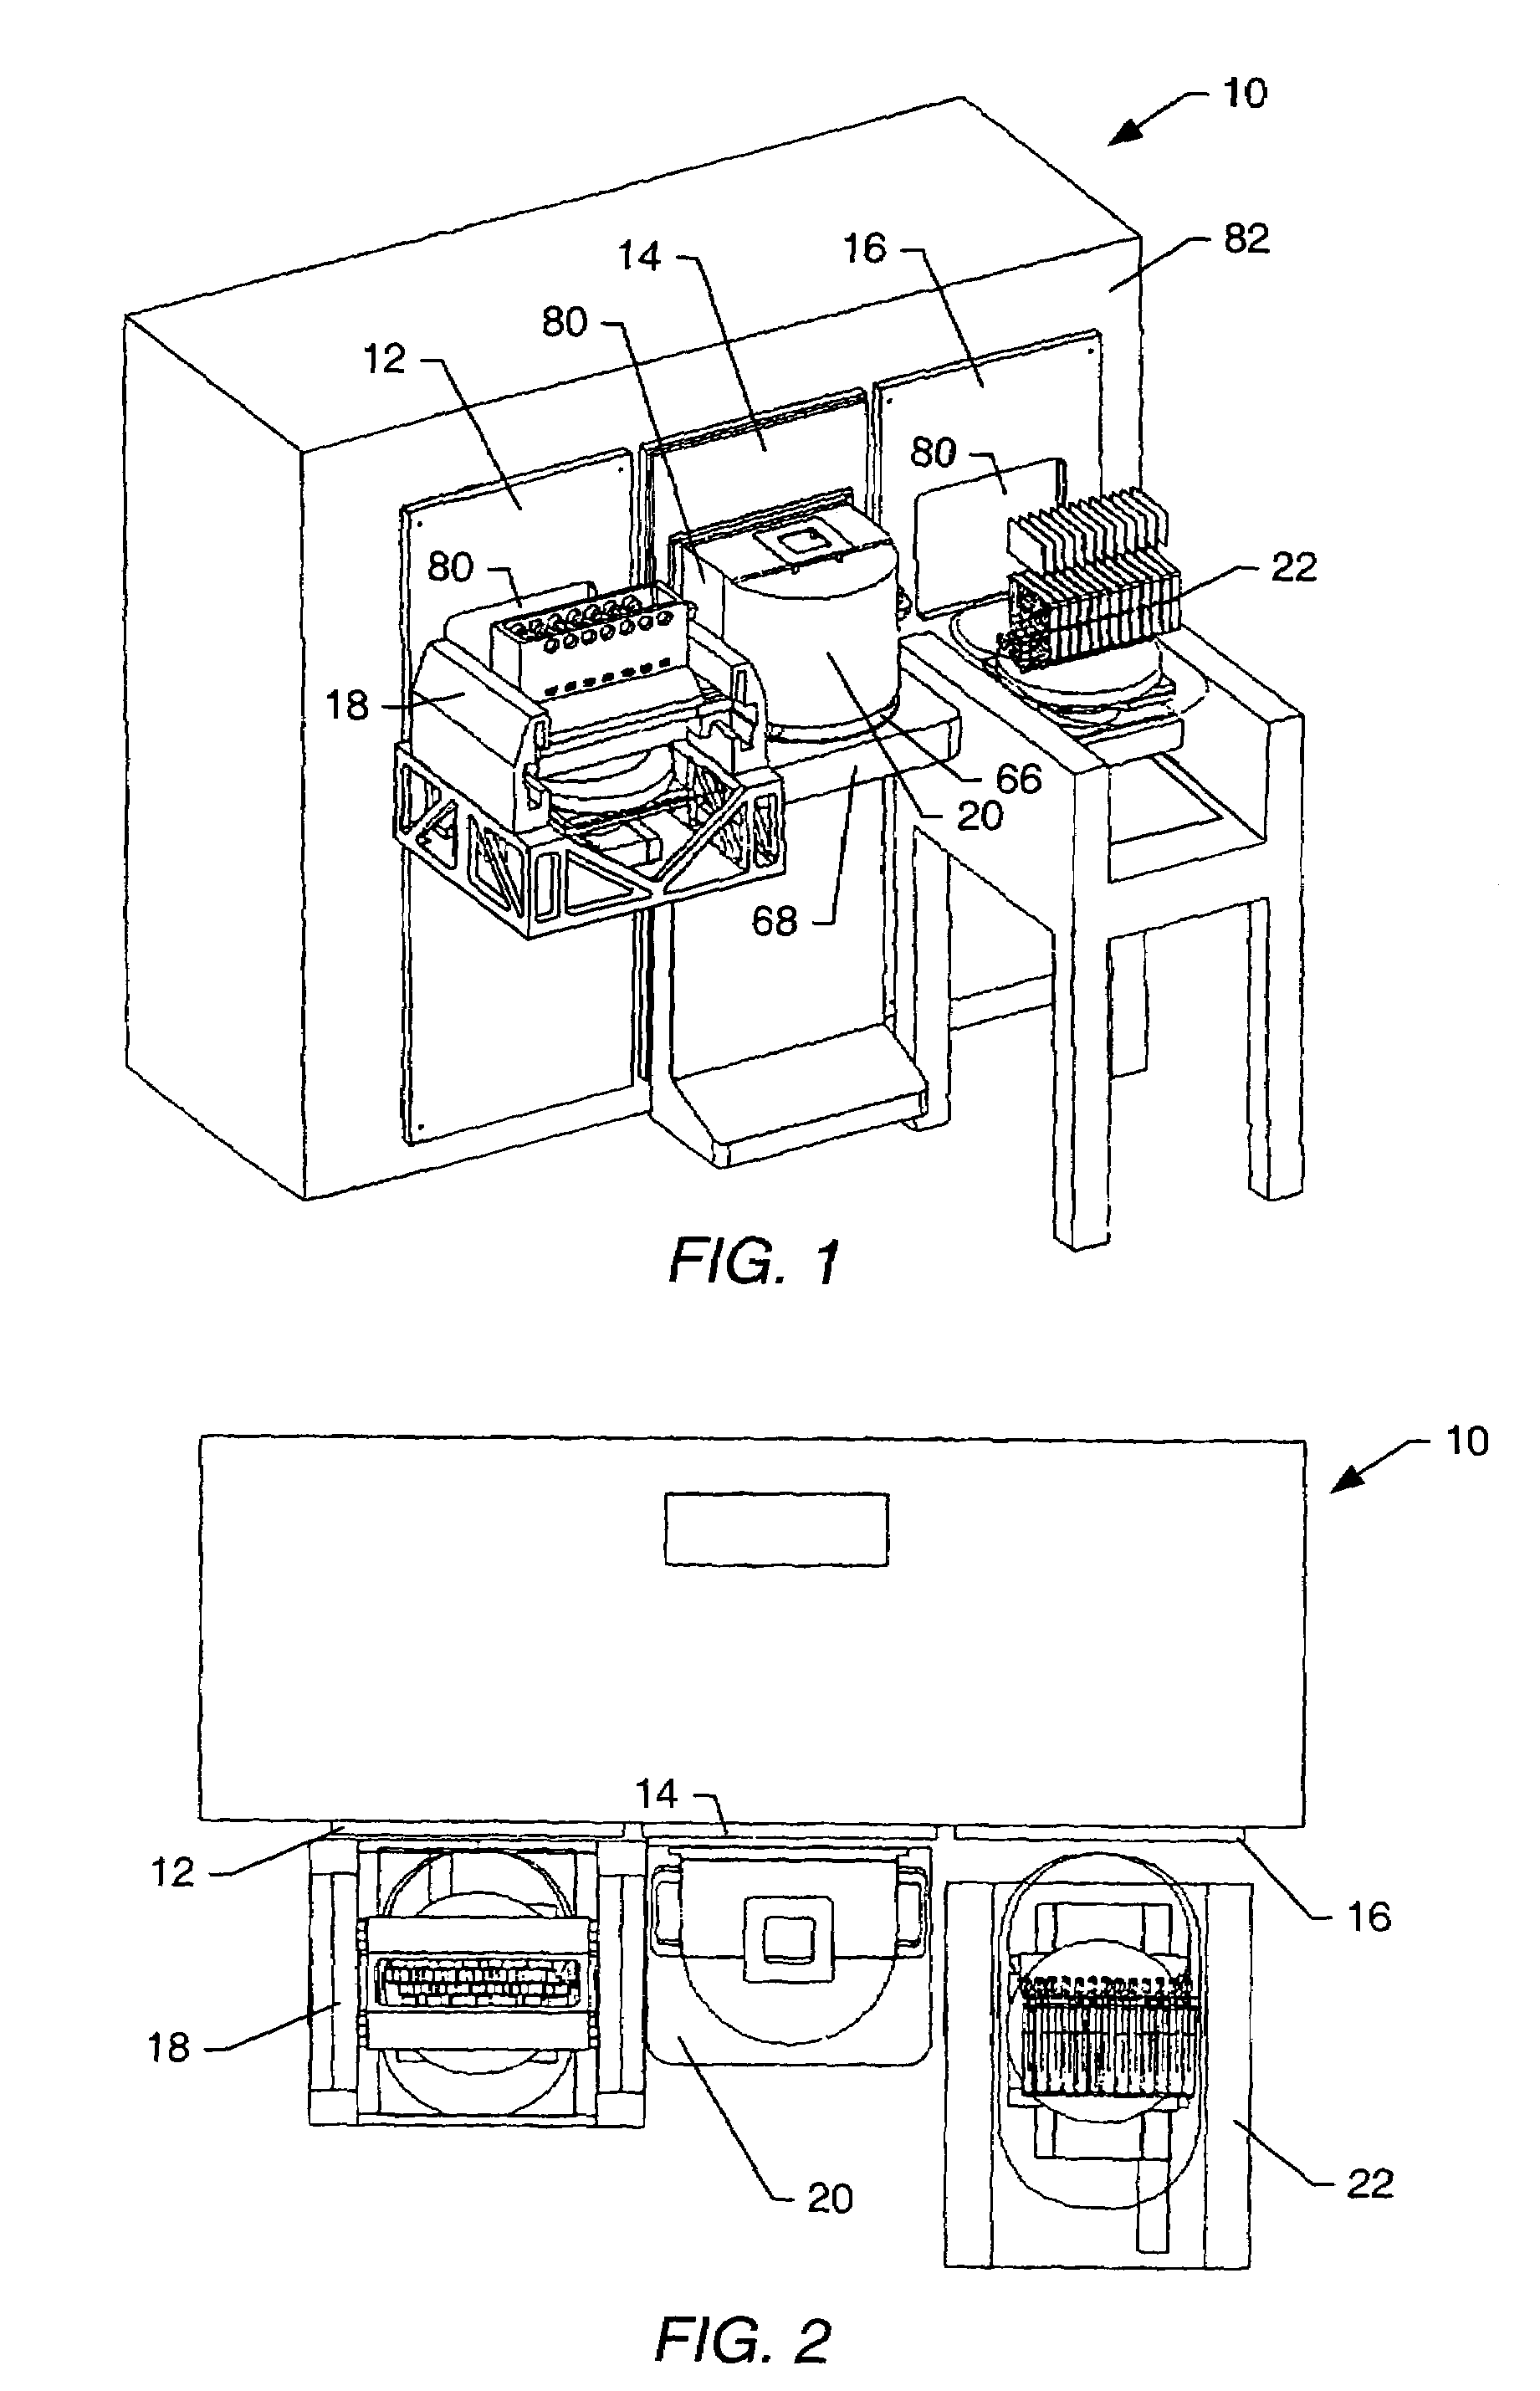 Method of interfacing ancillary equipment to FIMS processing stations